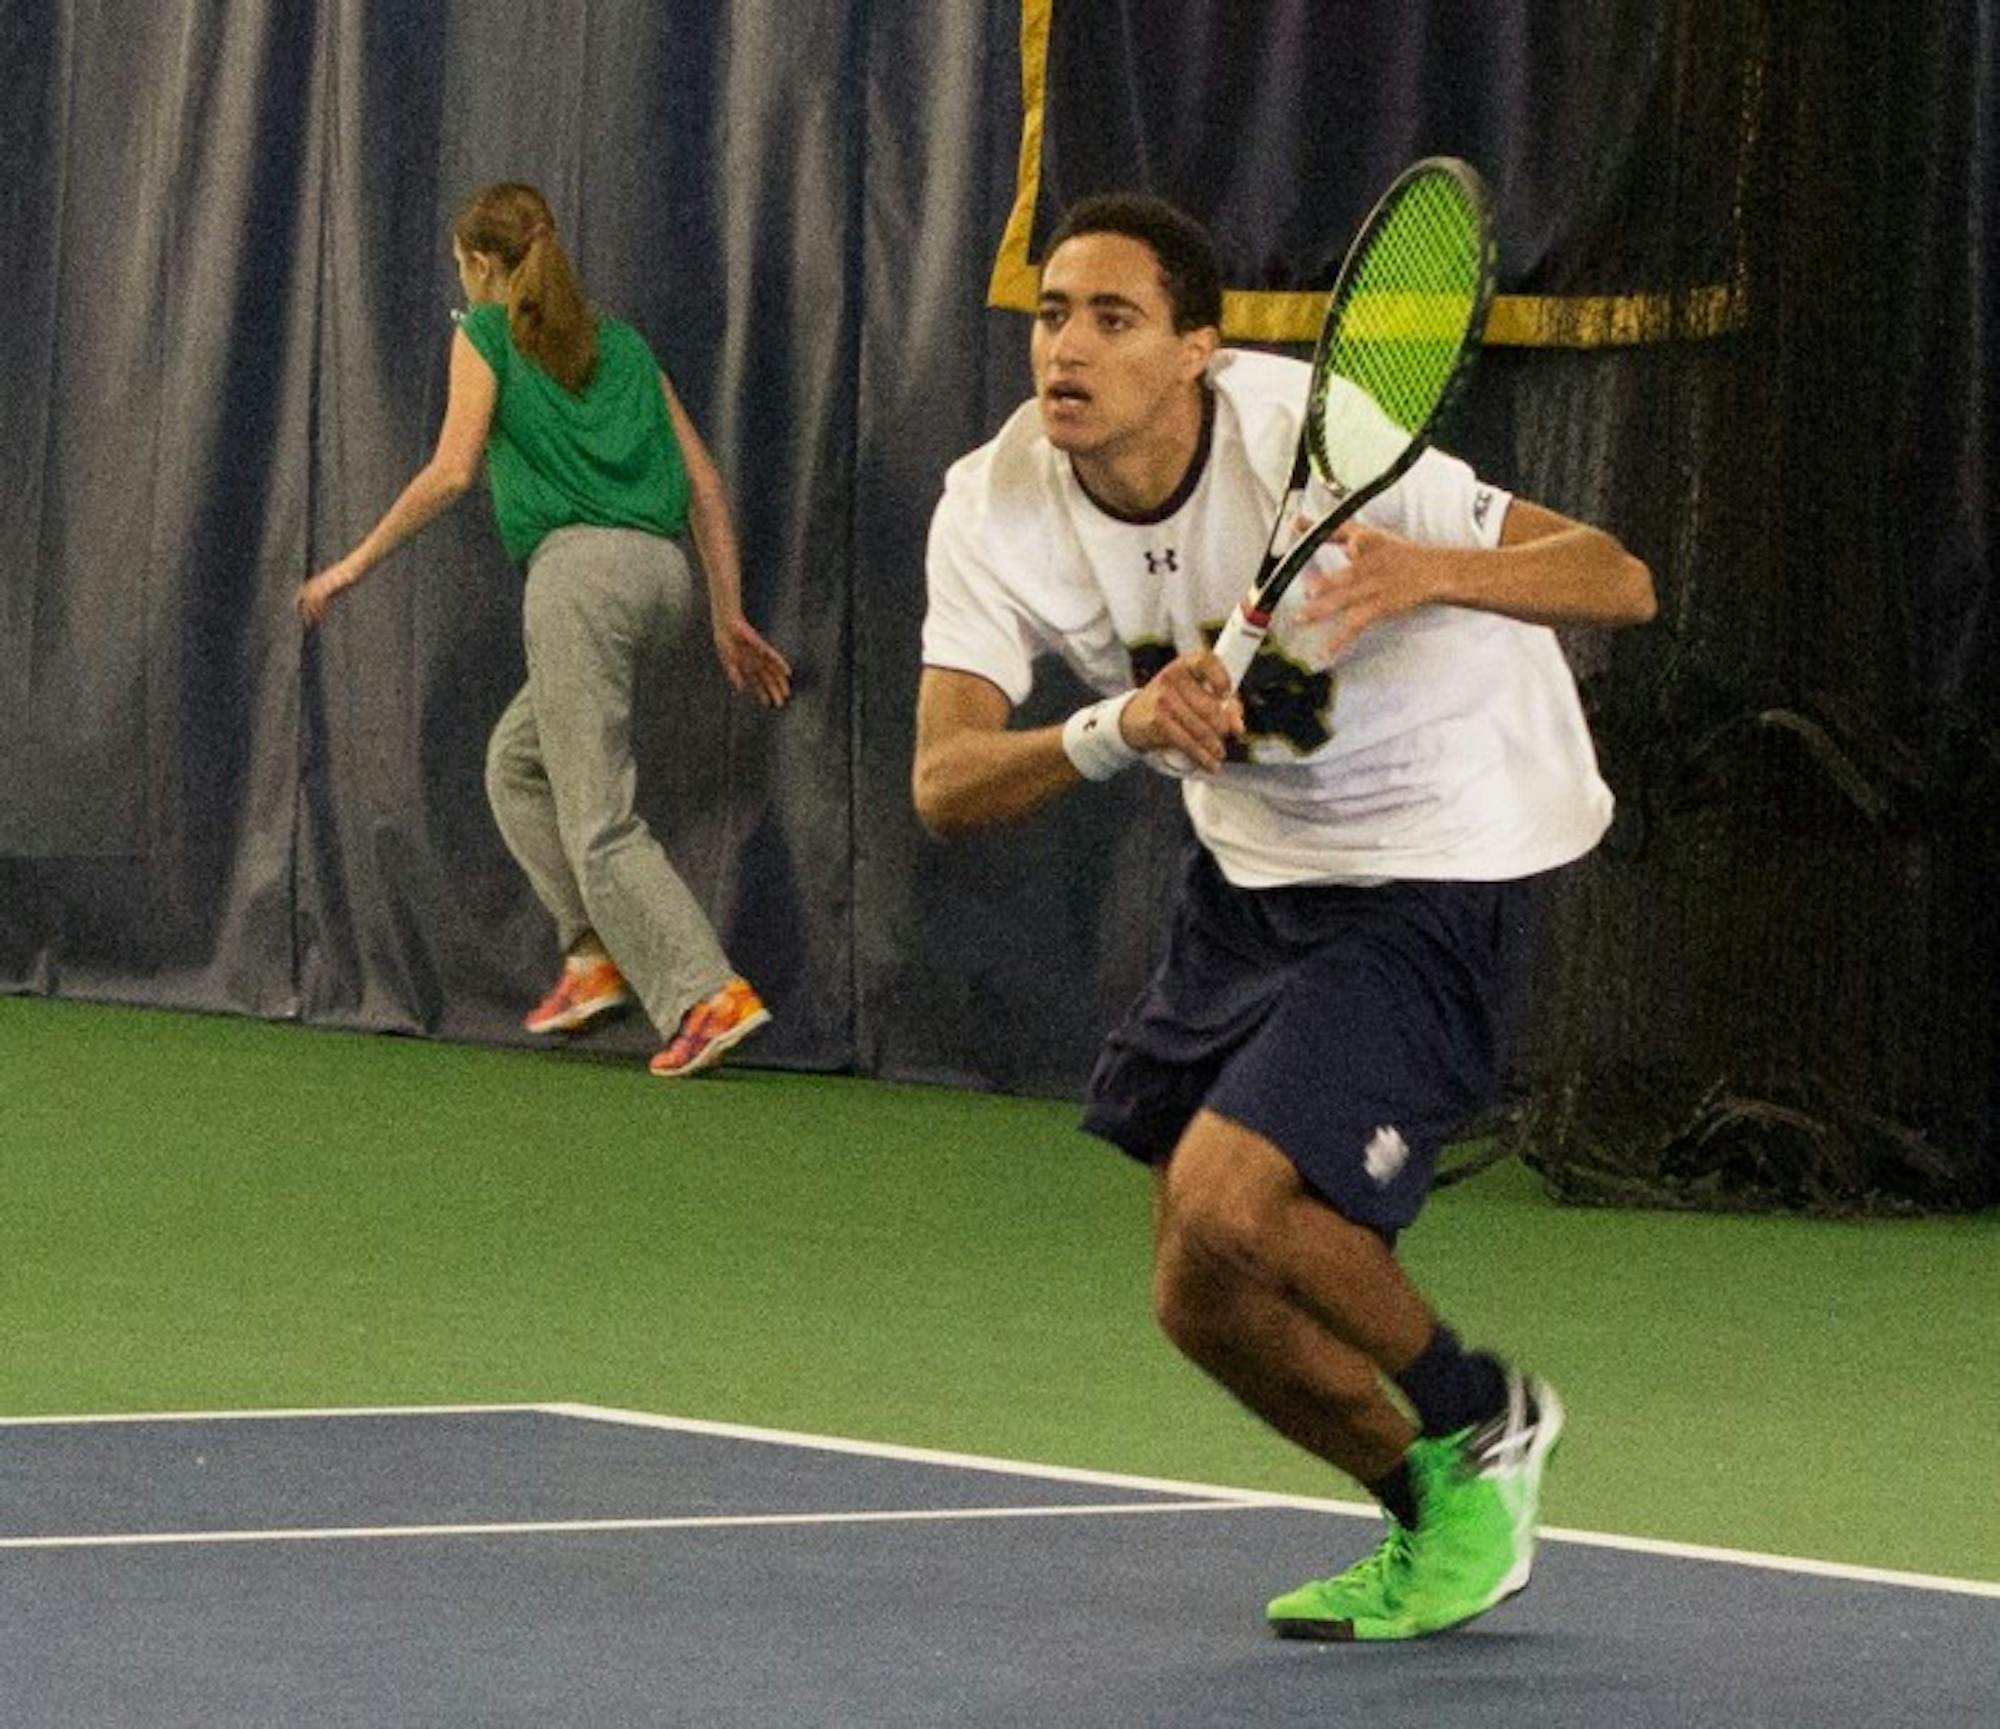 Irish freshman Grayson Broadus competes during Notre Dame’s 5-2 win over Indiana on Feb. 7 at Eck Tennis Pavilion.